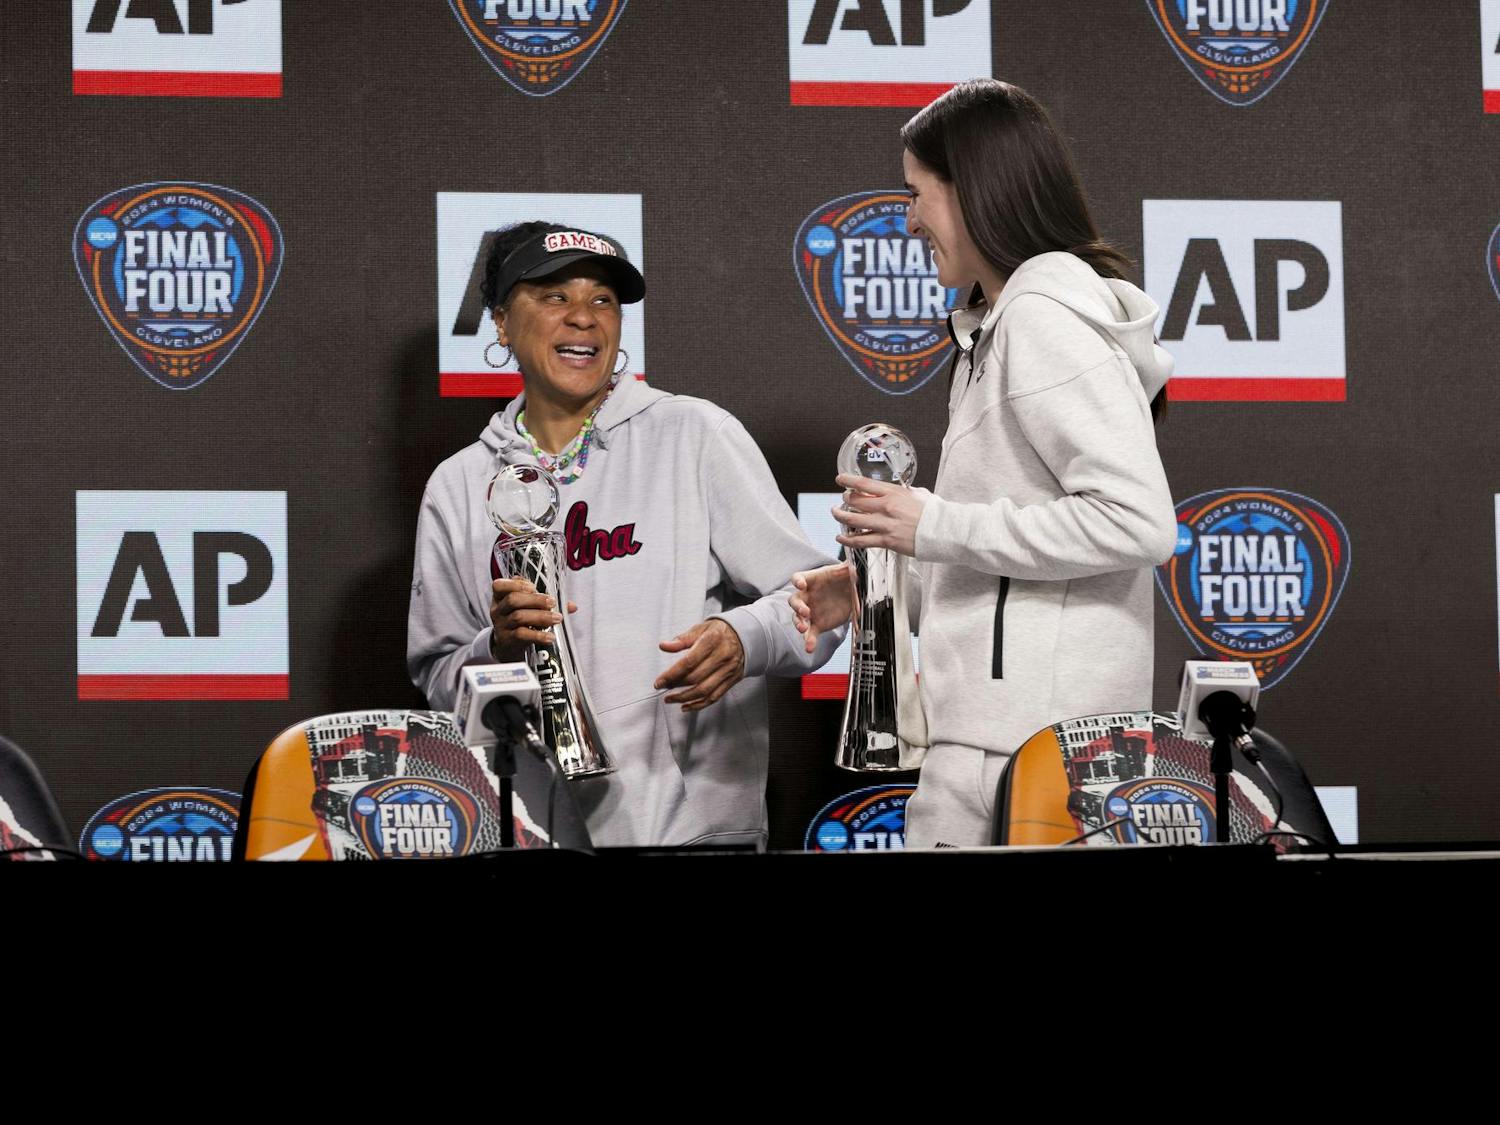 ɫɫƵ women’s basketball head coach Dawn Staley (left) and Iowa senior guard Caitlin Clark (right) laugh while walking off stage after receiving their AP Coach and Player of the year awards, respectively. This is Staley's second time winning the AP Coach of the Year award. Staley also earned the Women's Basketball Coaches Association award for the third consecutive year and the fourth time in five years.